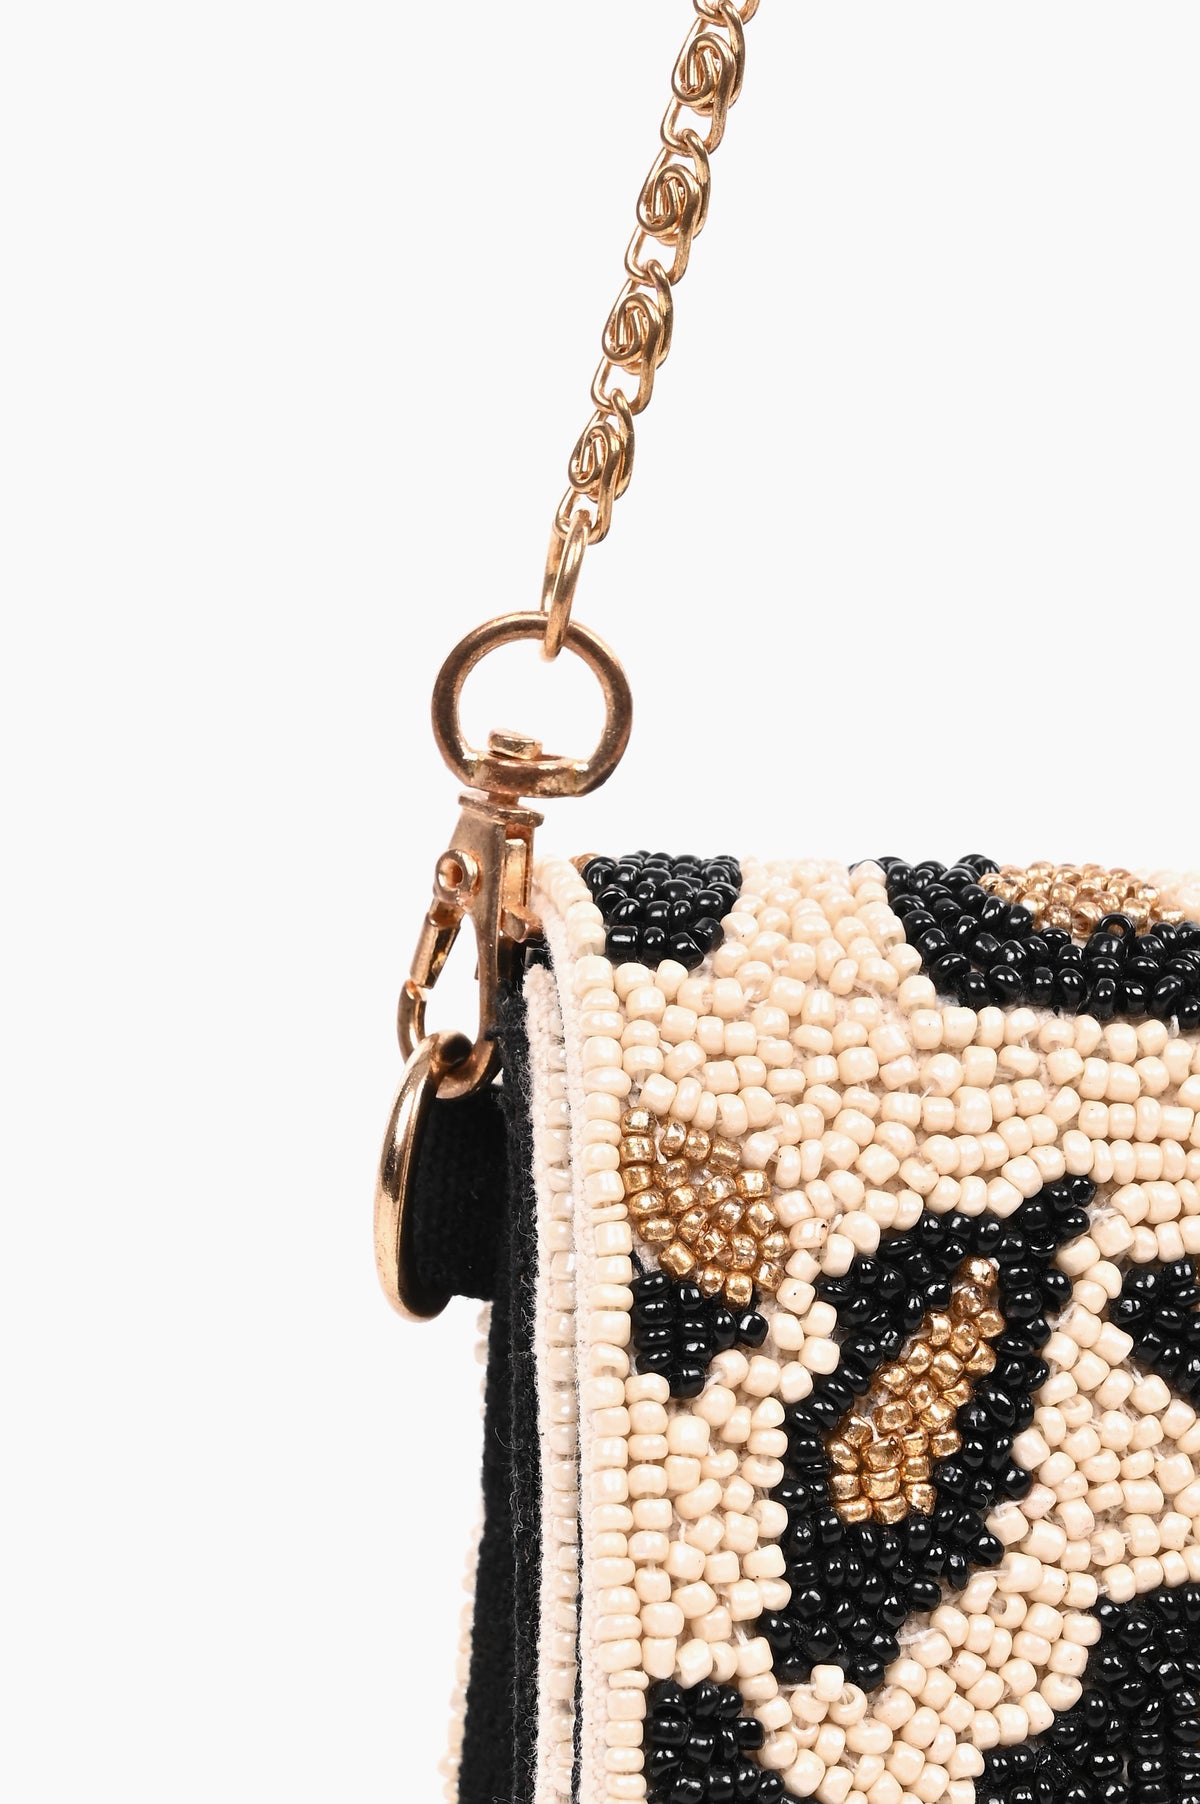 Bee Glam Clutch | America and Beyond